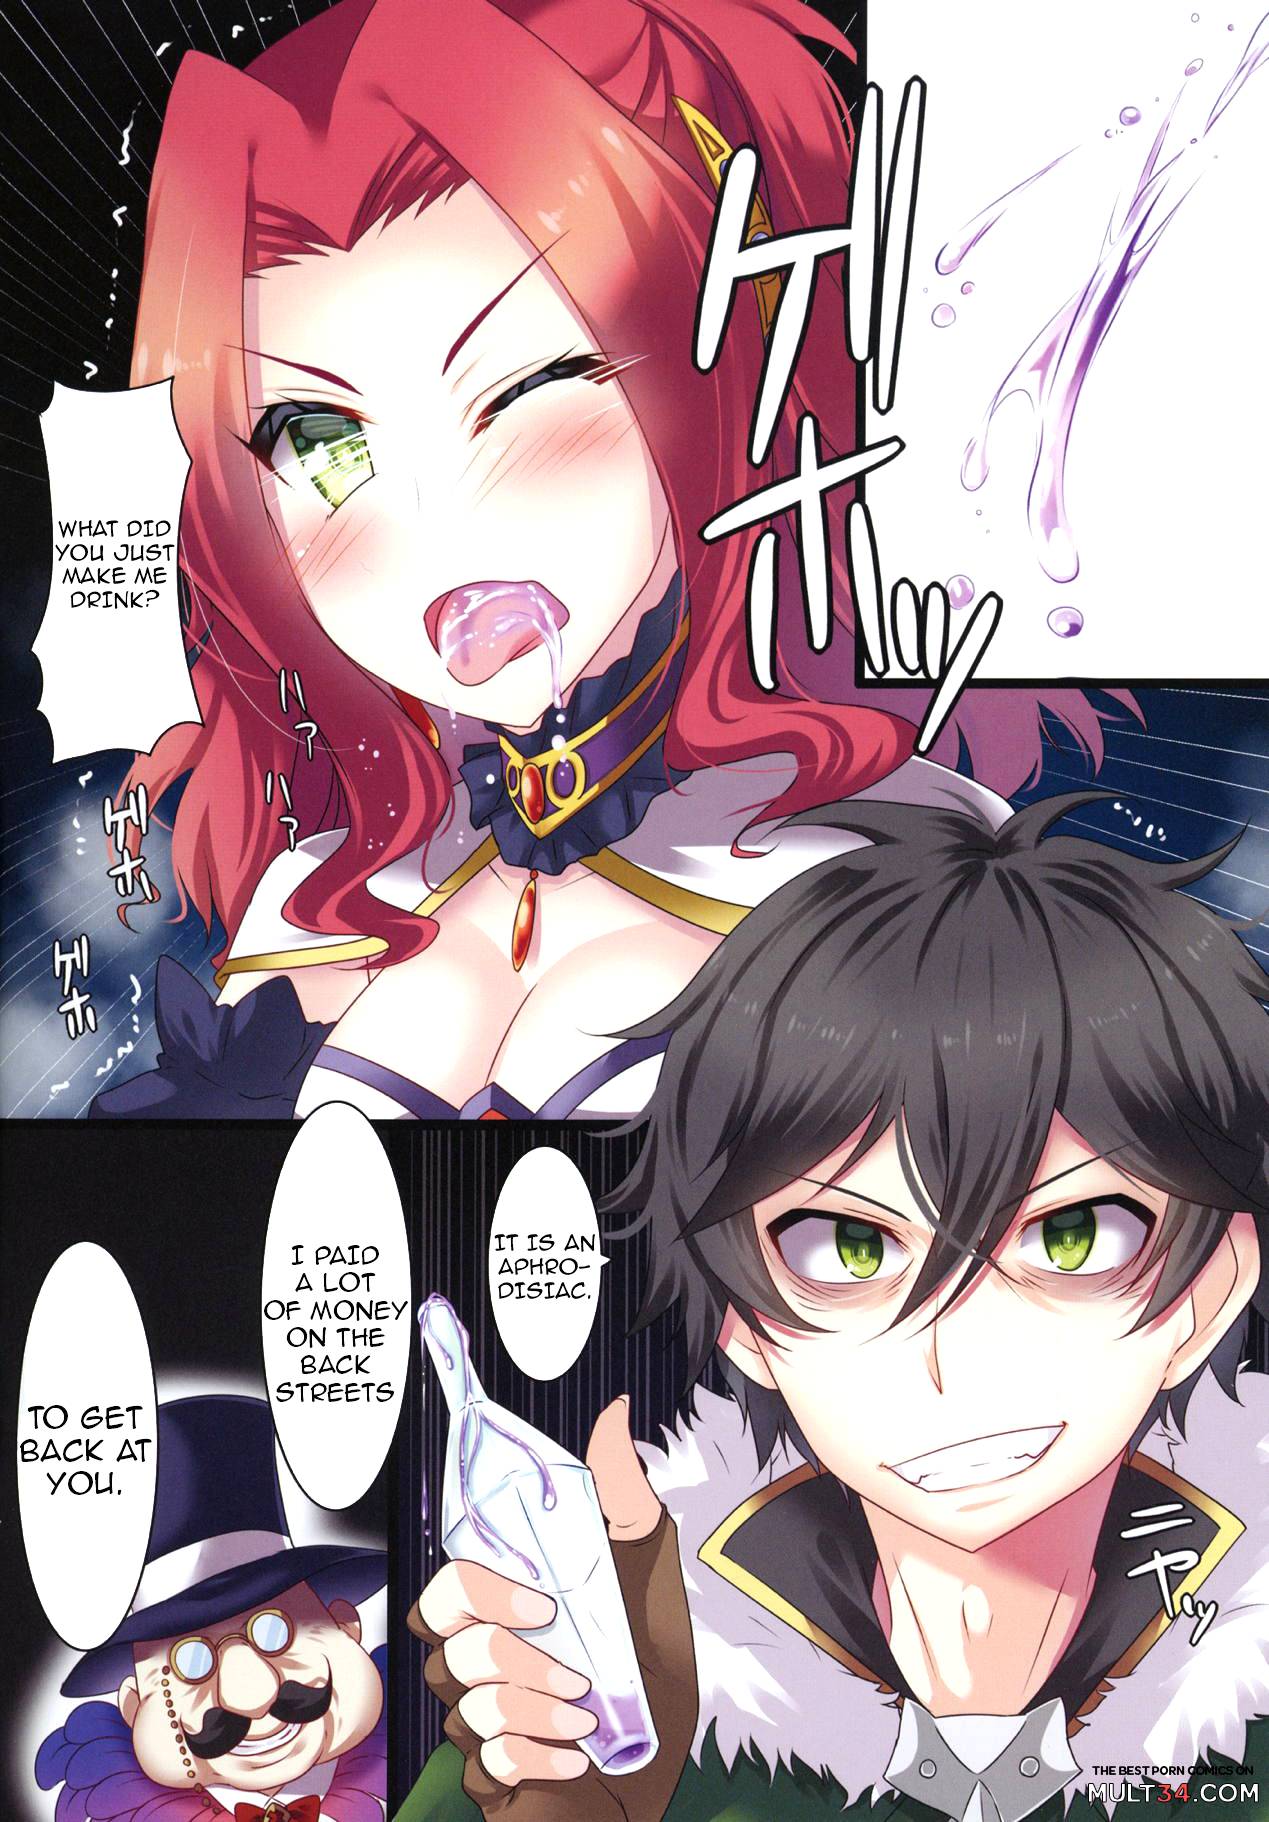 The Rising Of The Shield Hero Porn